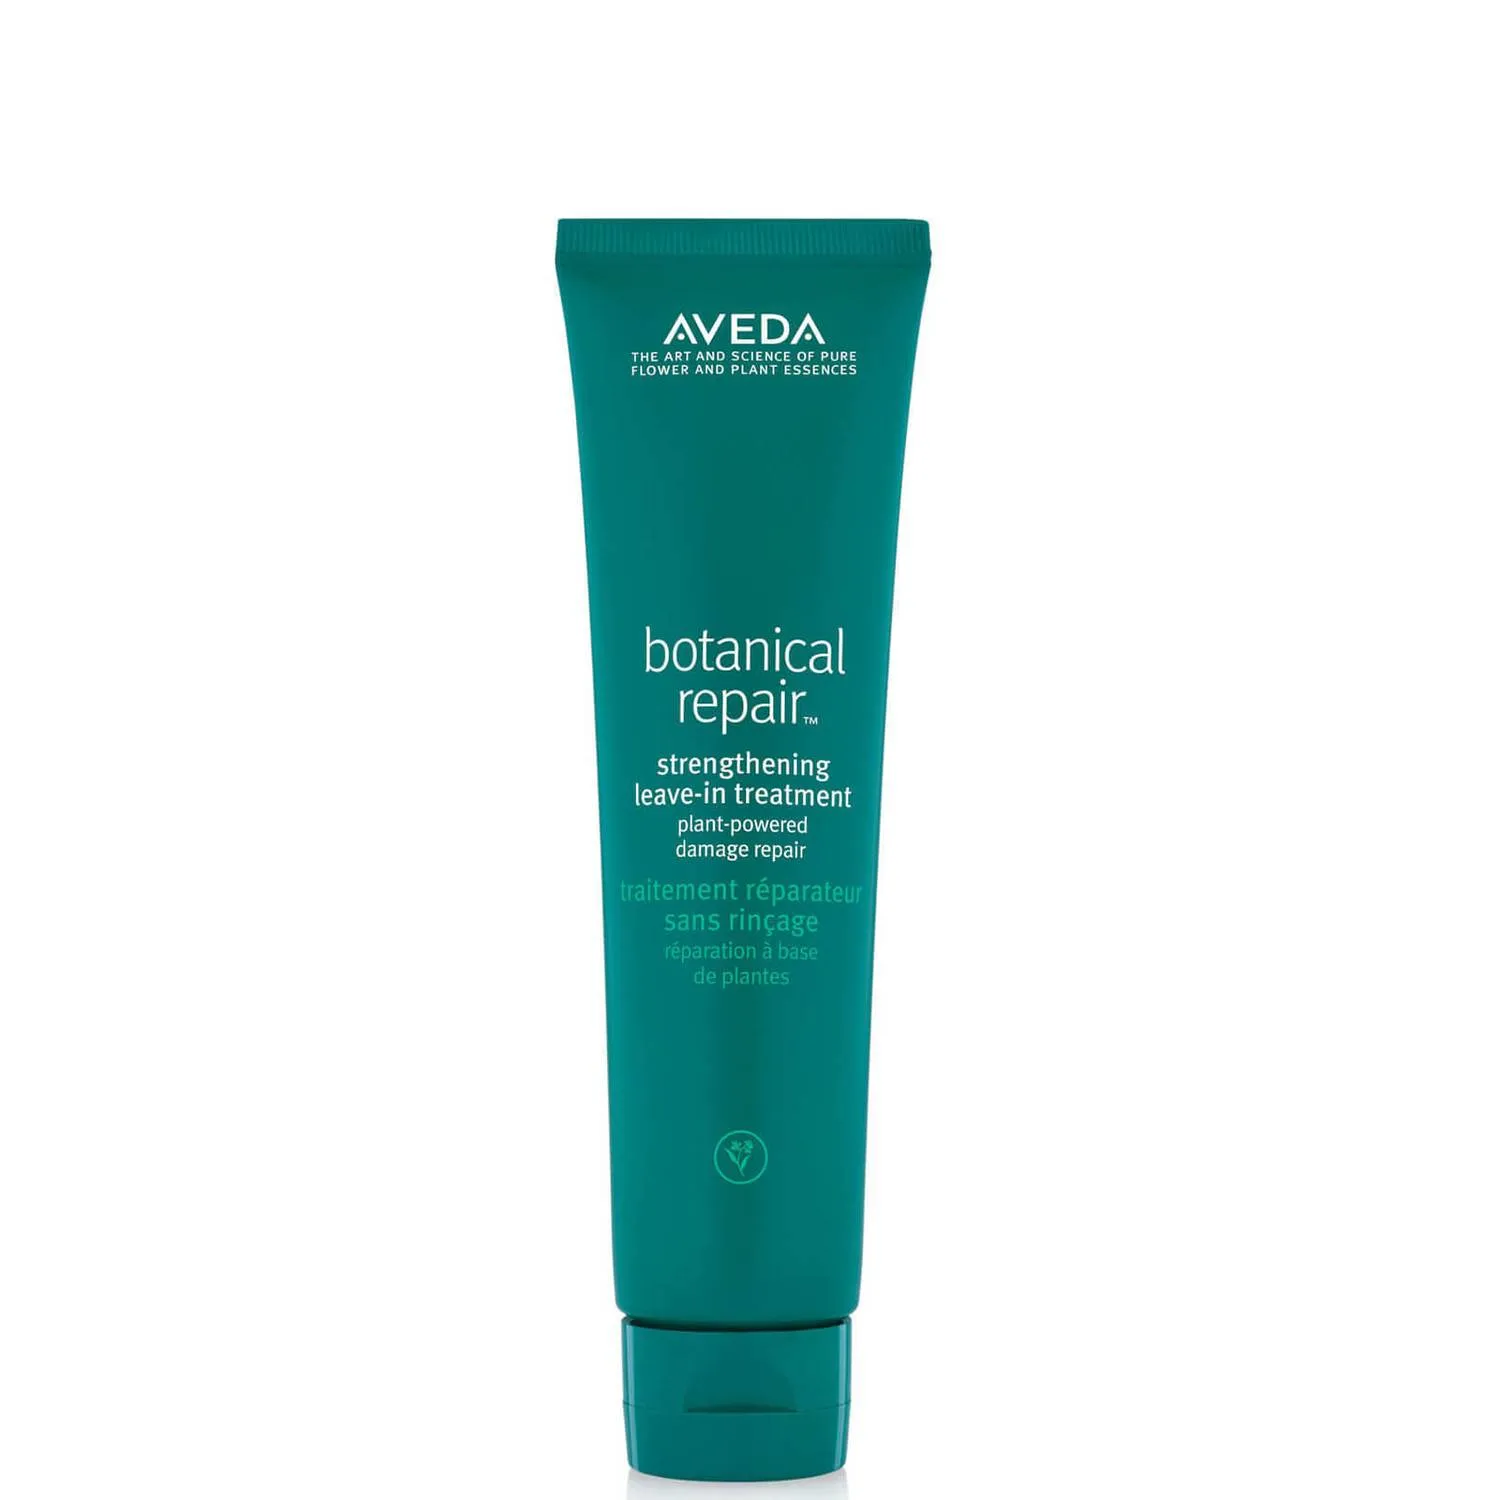 A tied FEMMENORDIC's choice in the Aveda vs Living Proof treatment comparison, Aveda Botanical Repair Leave-In Treatment